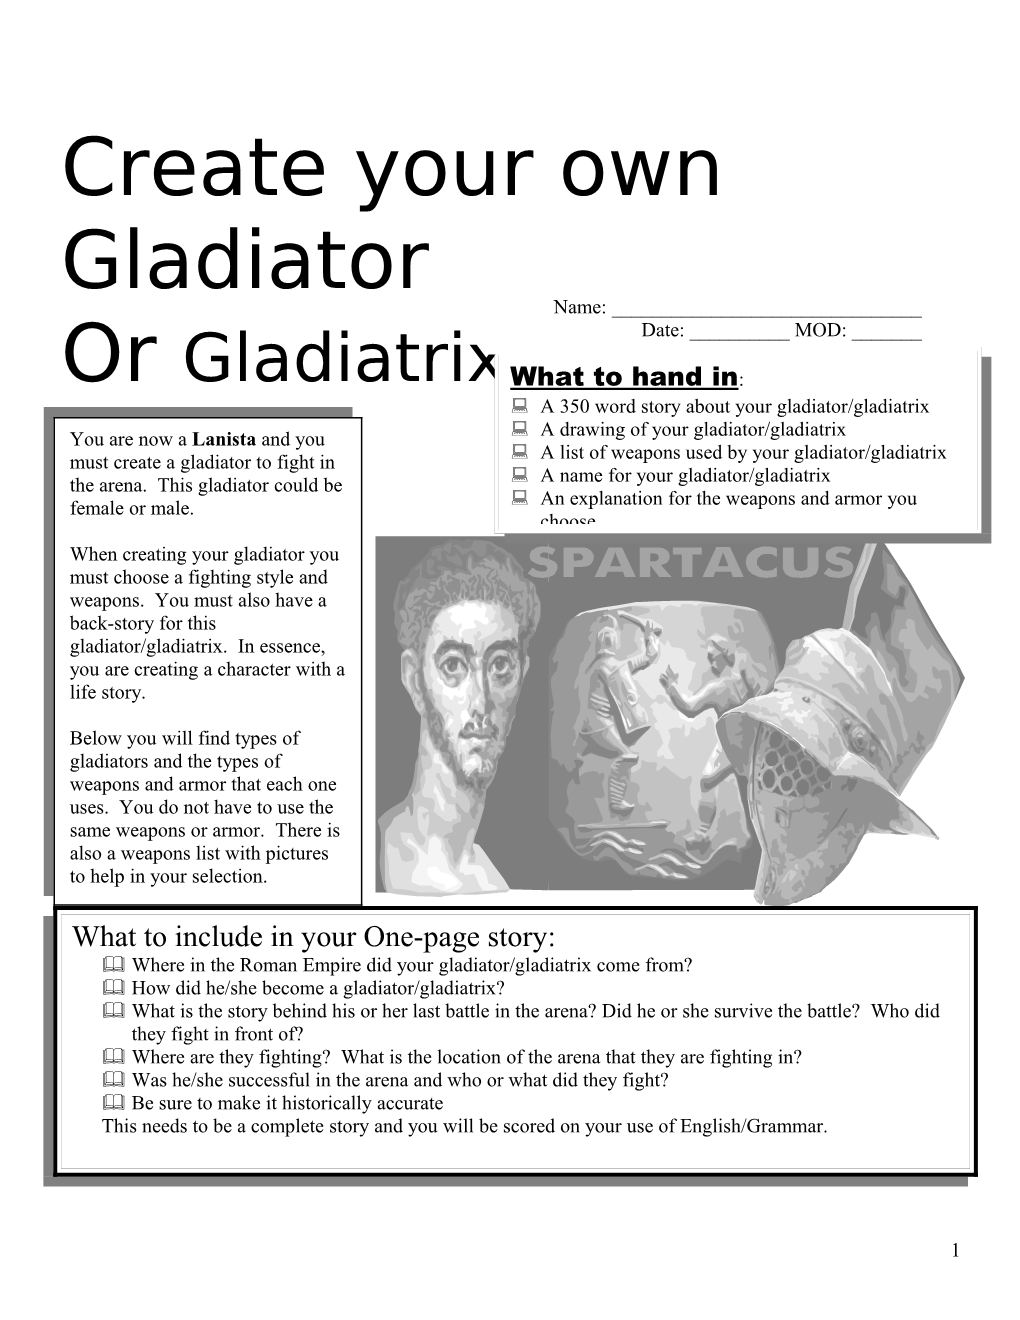 Create Your Own Gladiator